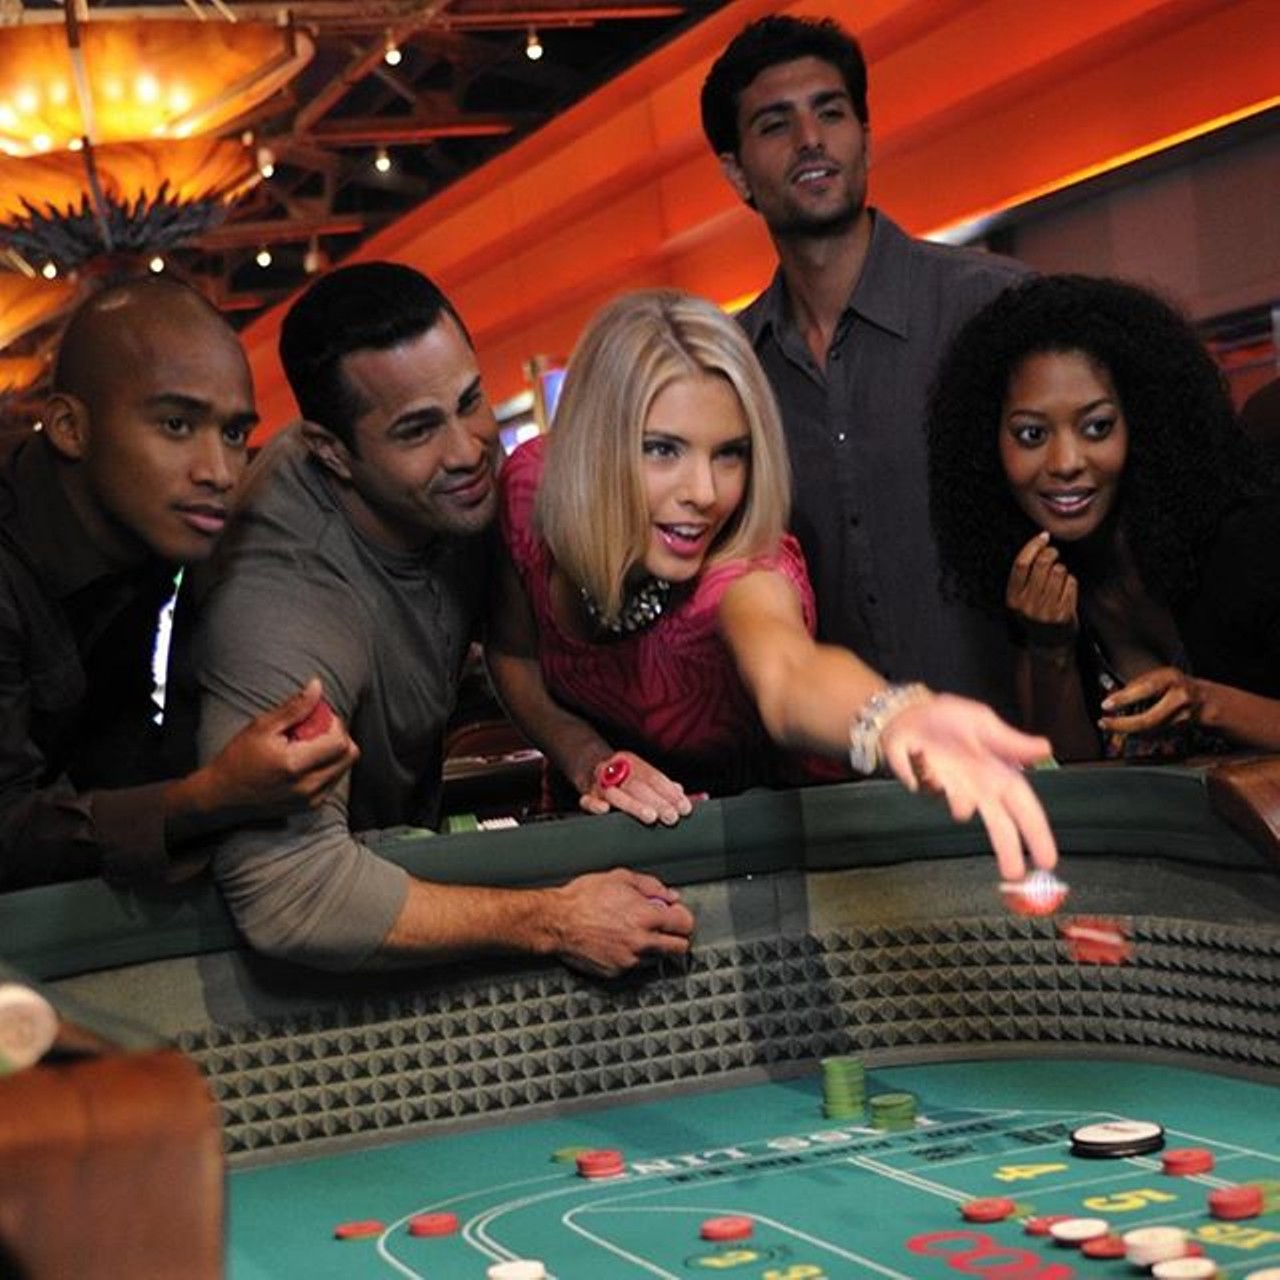 Go to the casino
Nothing better to help you forget a crummy day outside than winning tons of cash, which is what always happens at the casino. (Photo via Instagram, MotorCityCasino)